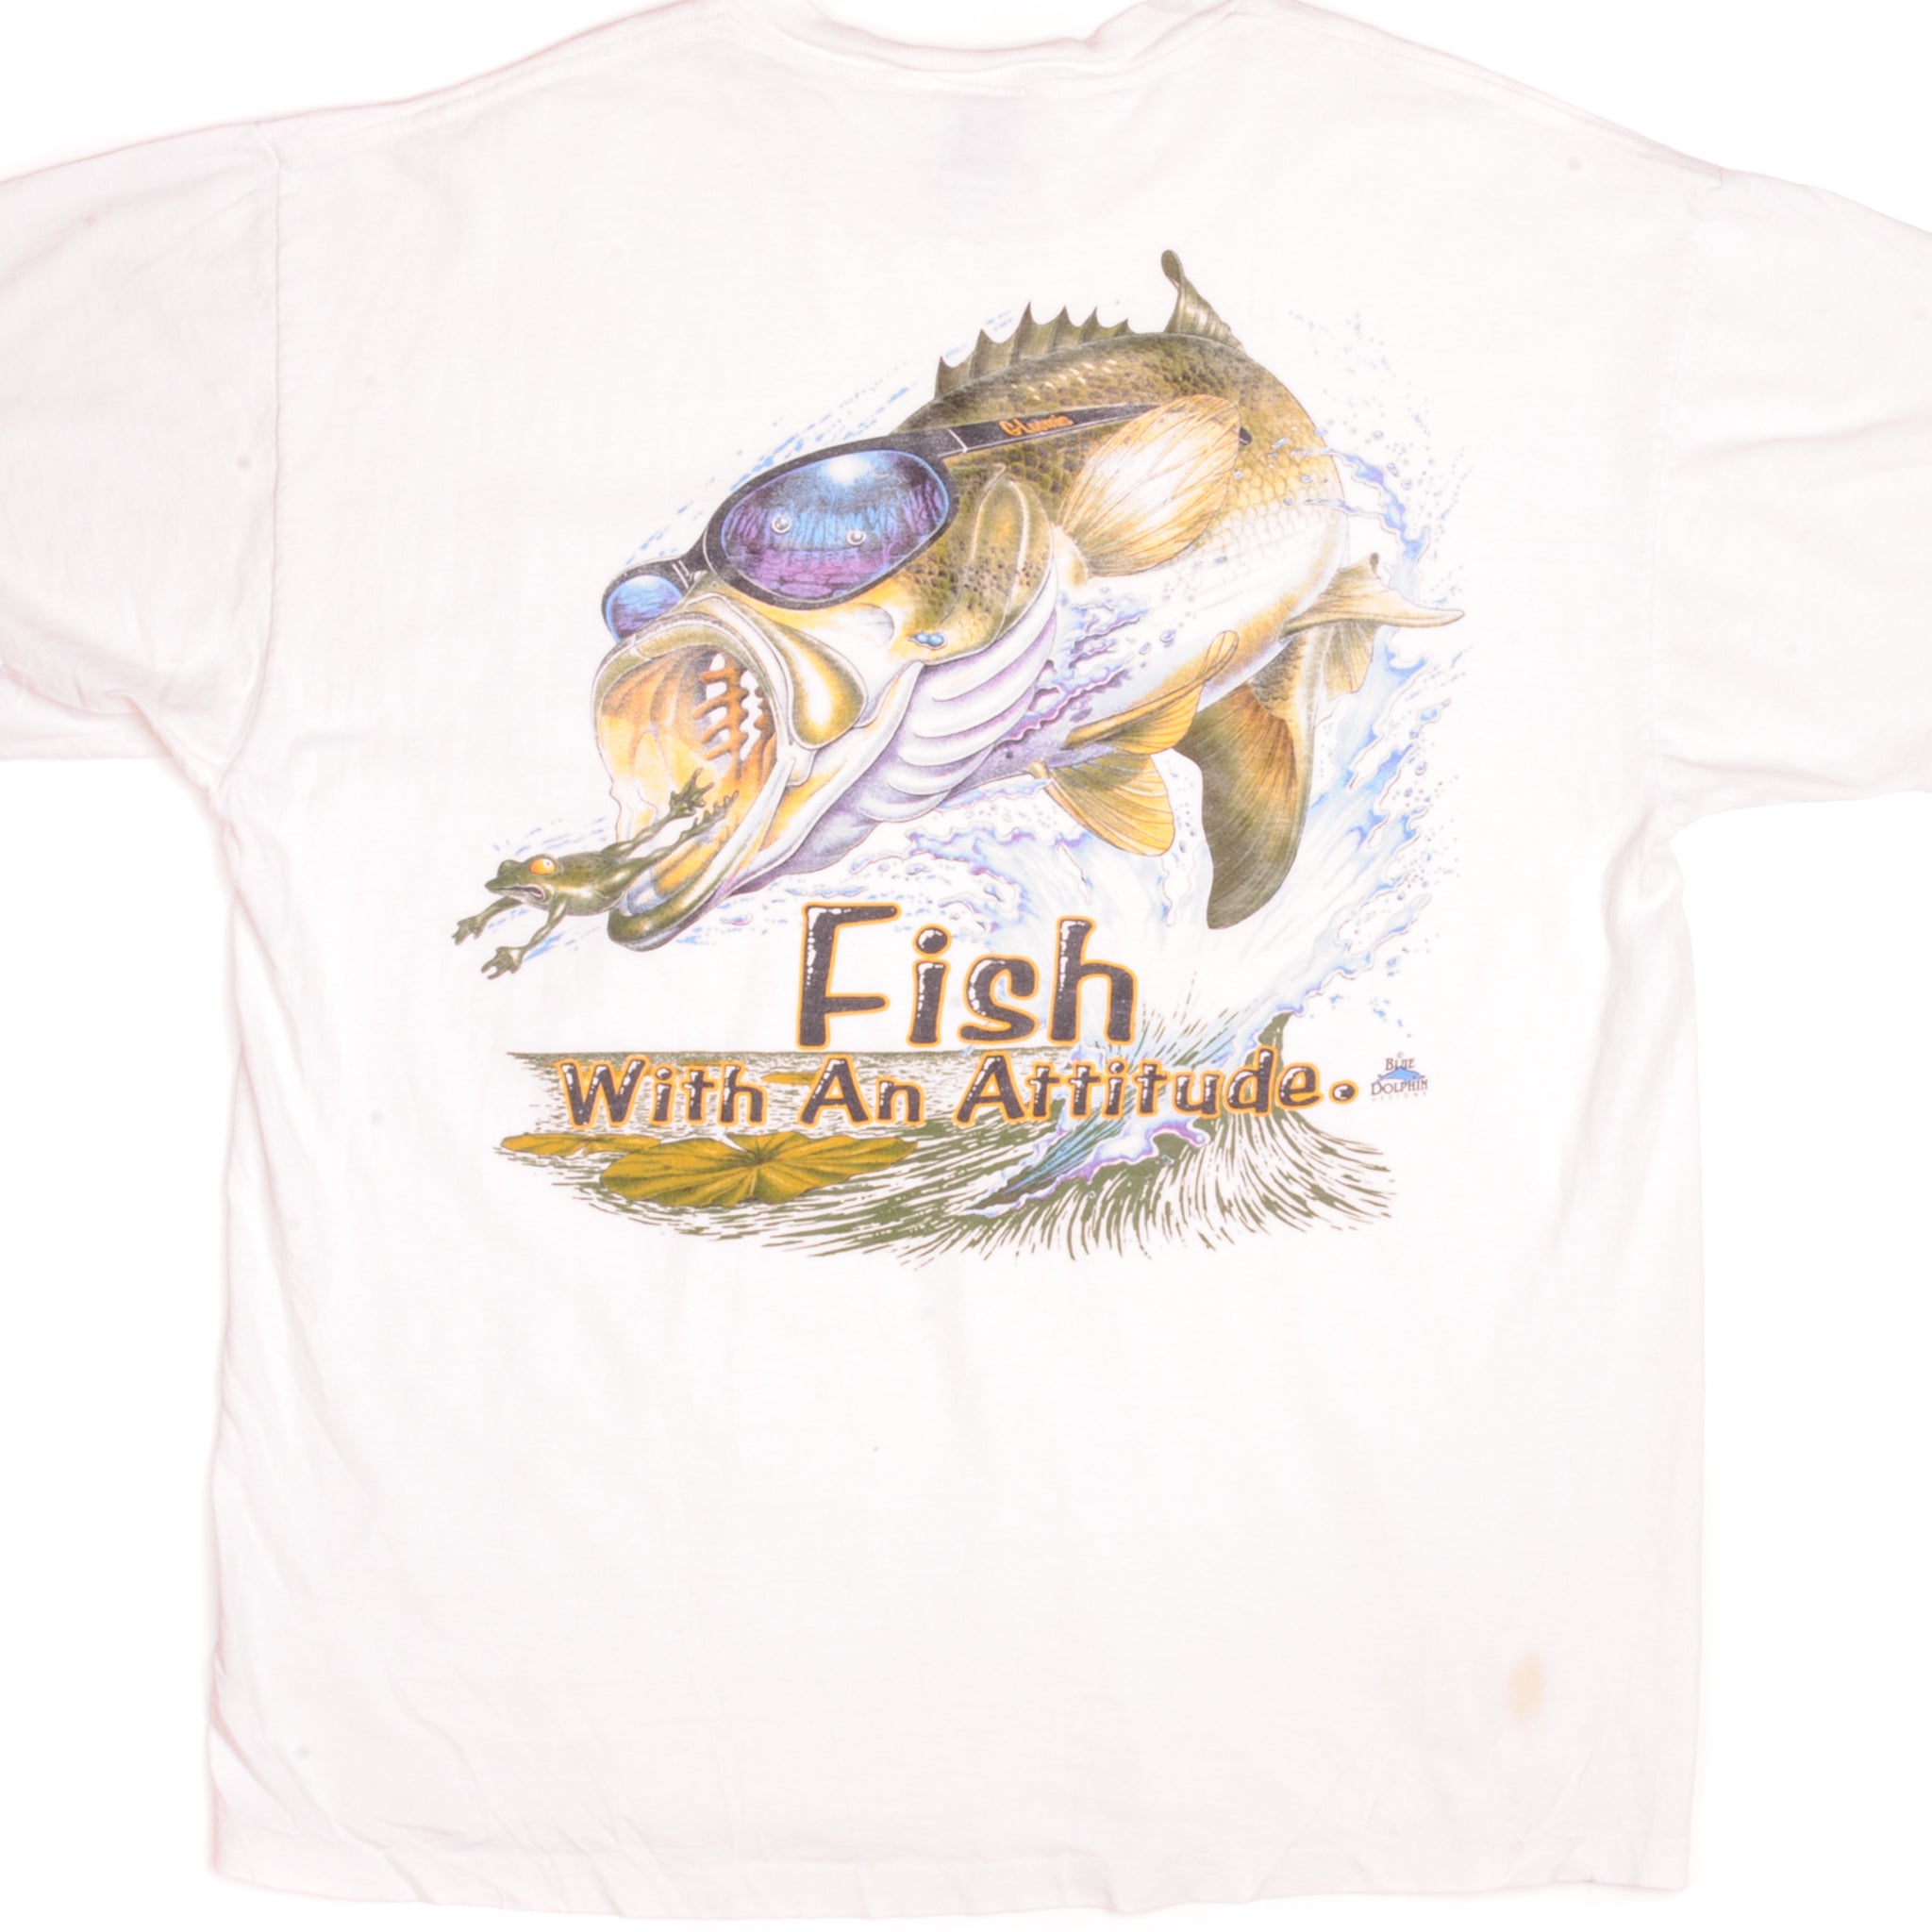 Vintage G. Loomis Fish with An Attitude Tee Shirt 90s Size XL